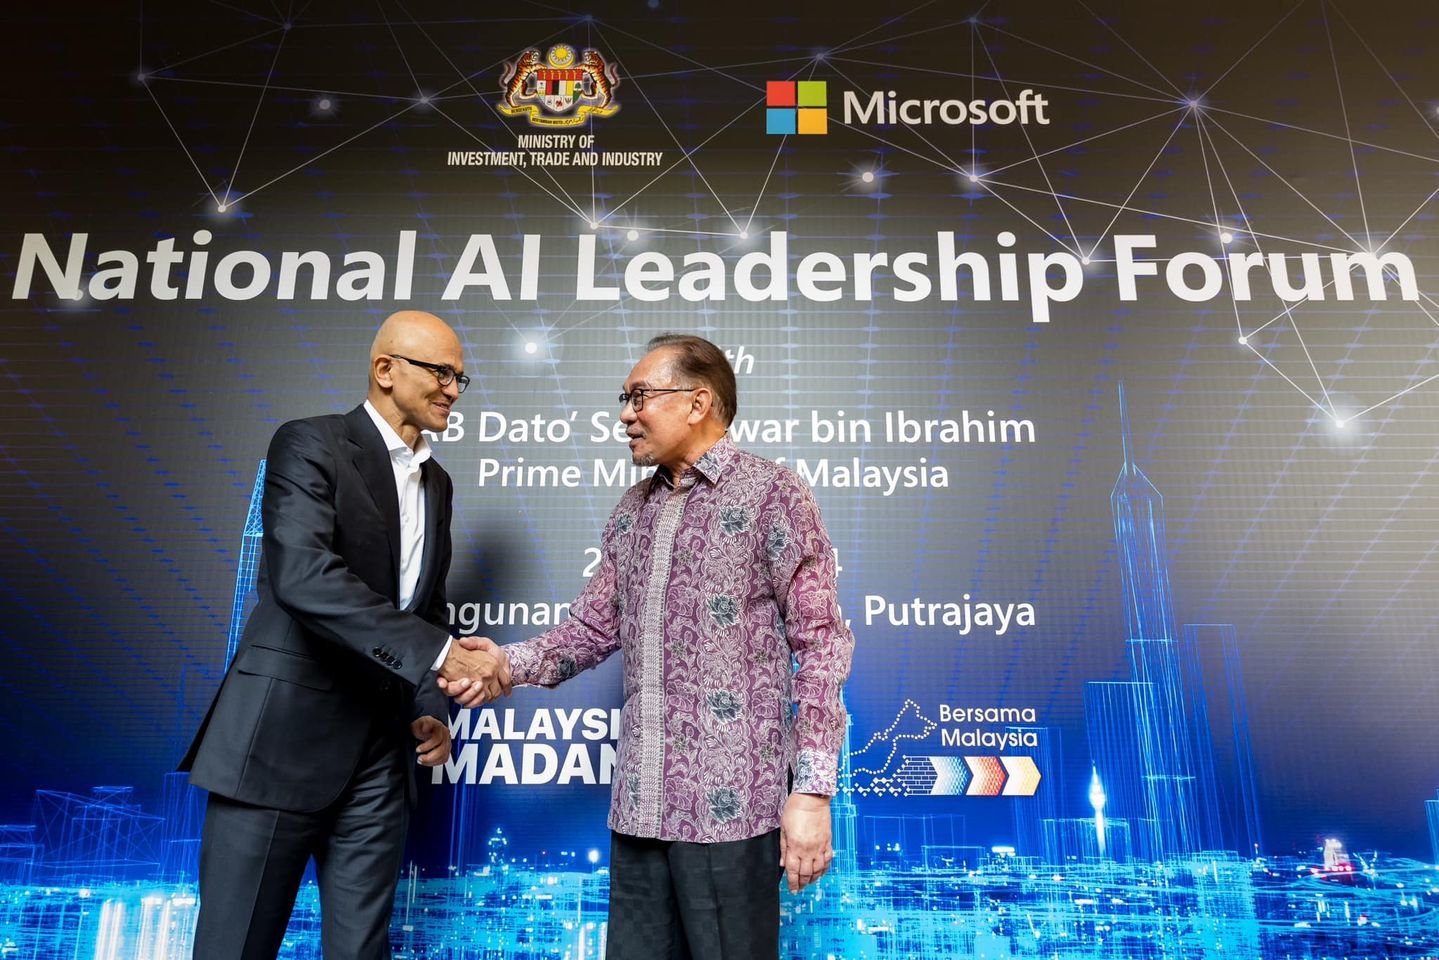 Microsoft invests $2.2 billion to build digital infrastructure in Malaysia